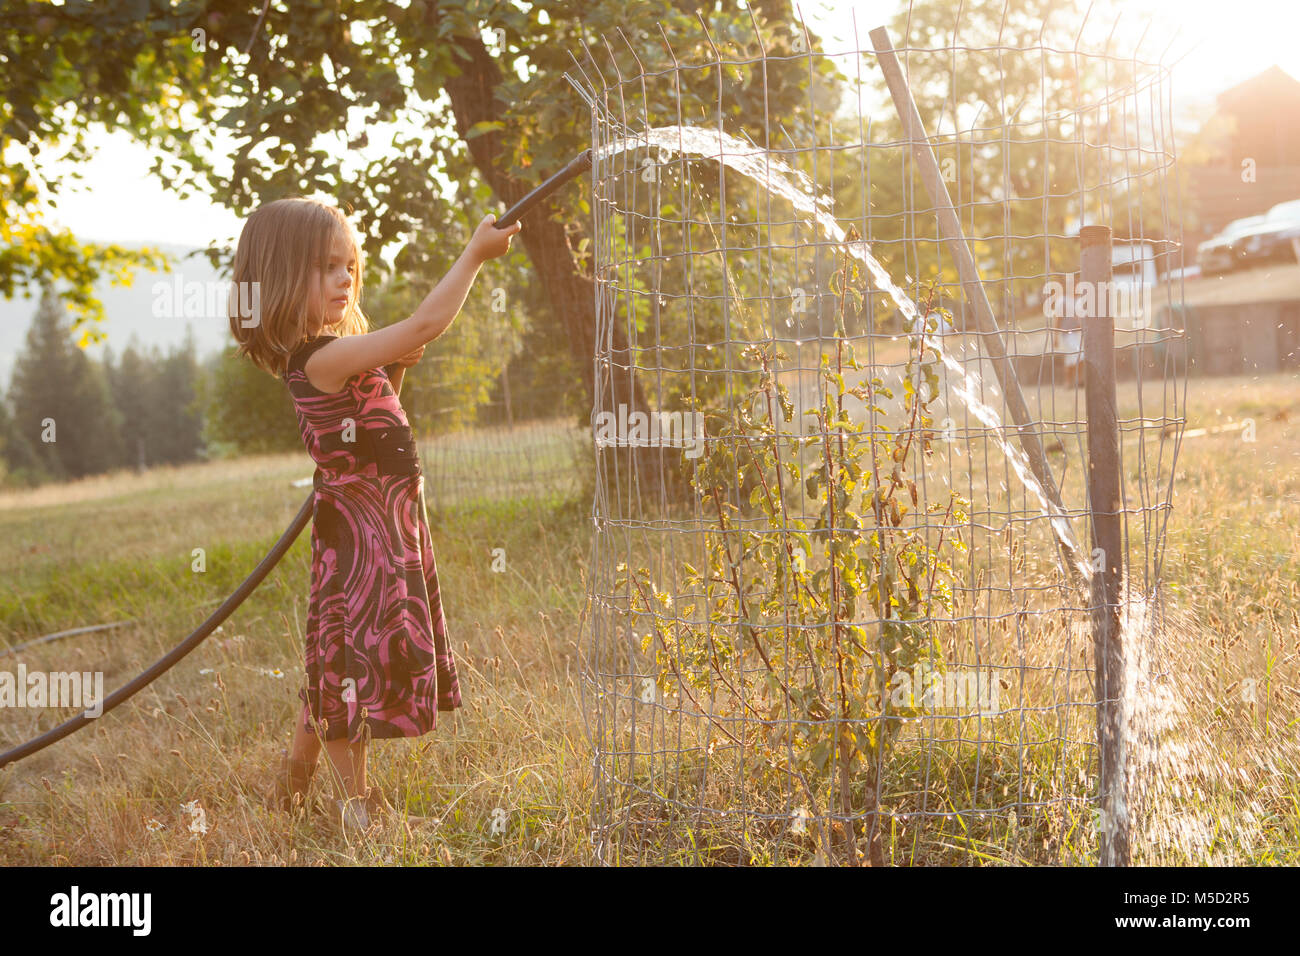 Girl in dress watering tree with hose in sunny, summer yard Stock Photo